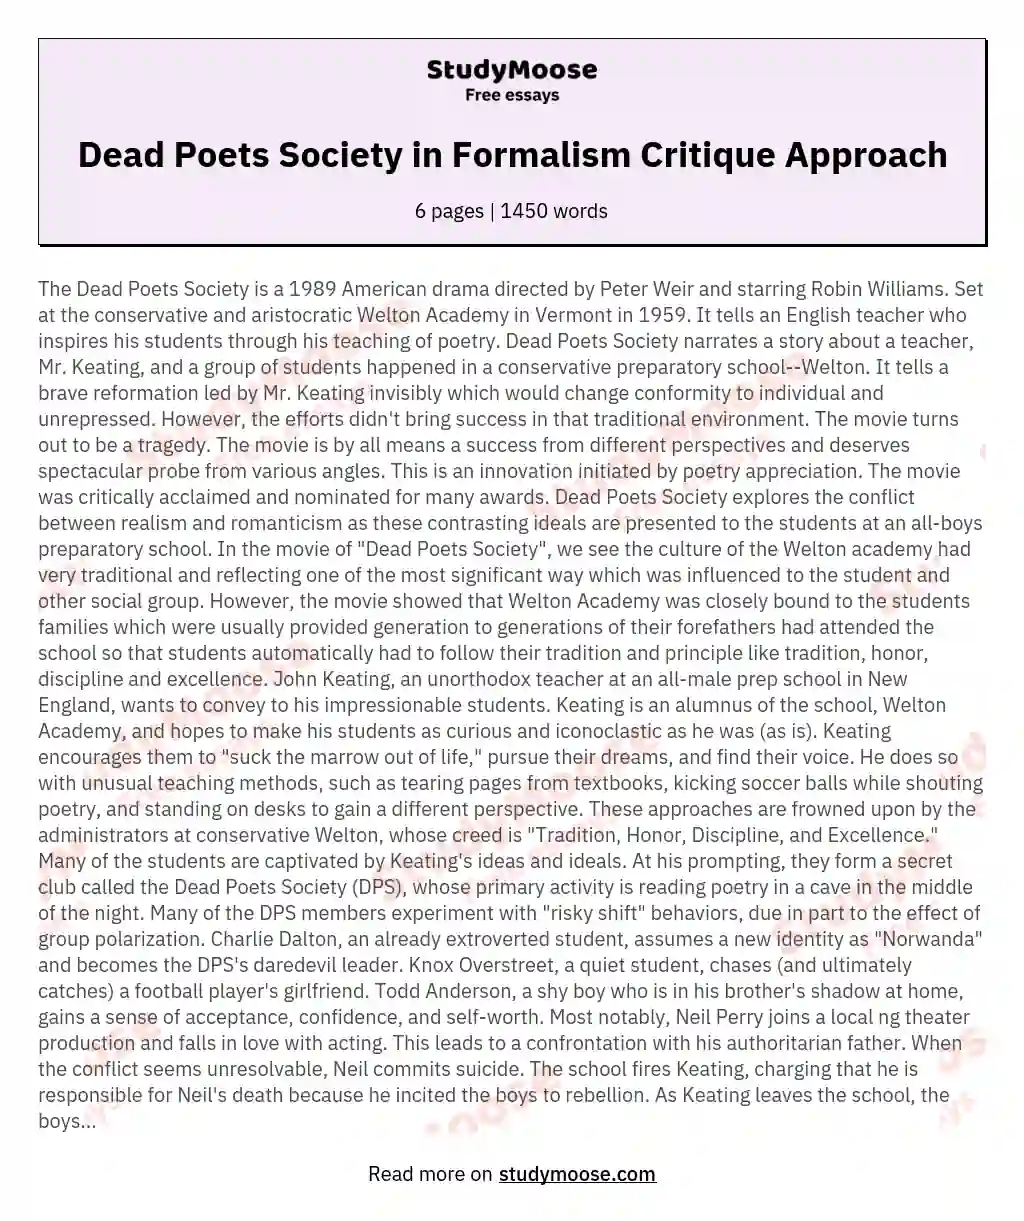 Dead Poets Society in Formalism Critique Approach essay